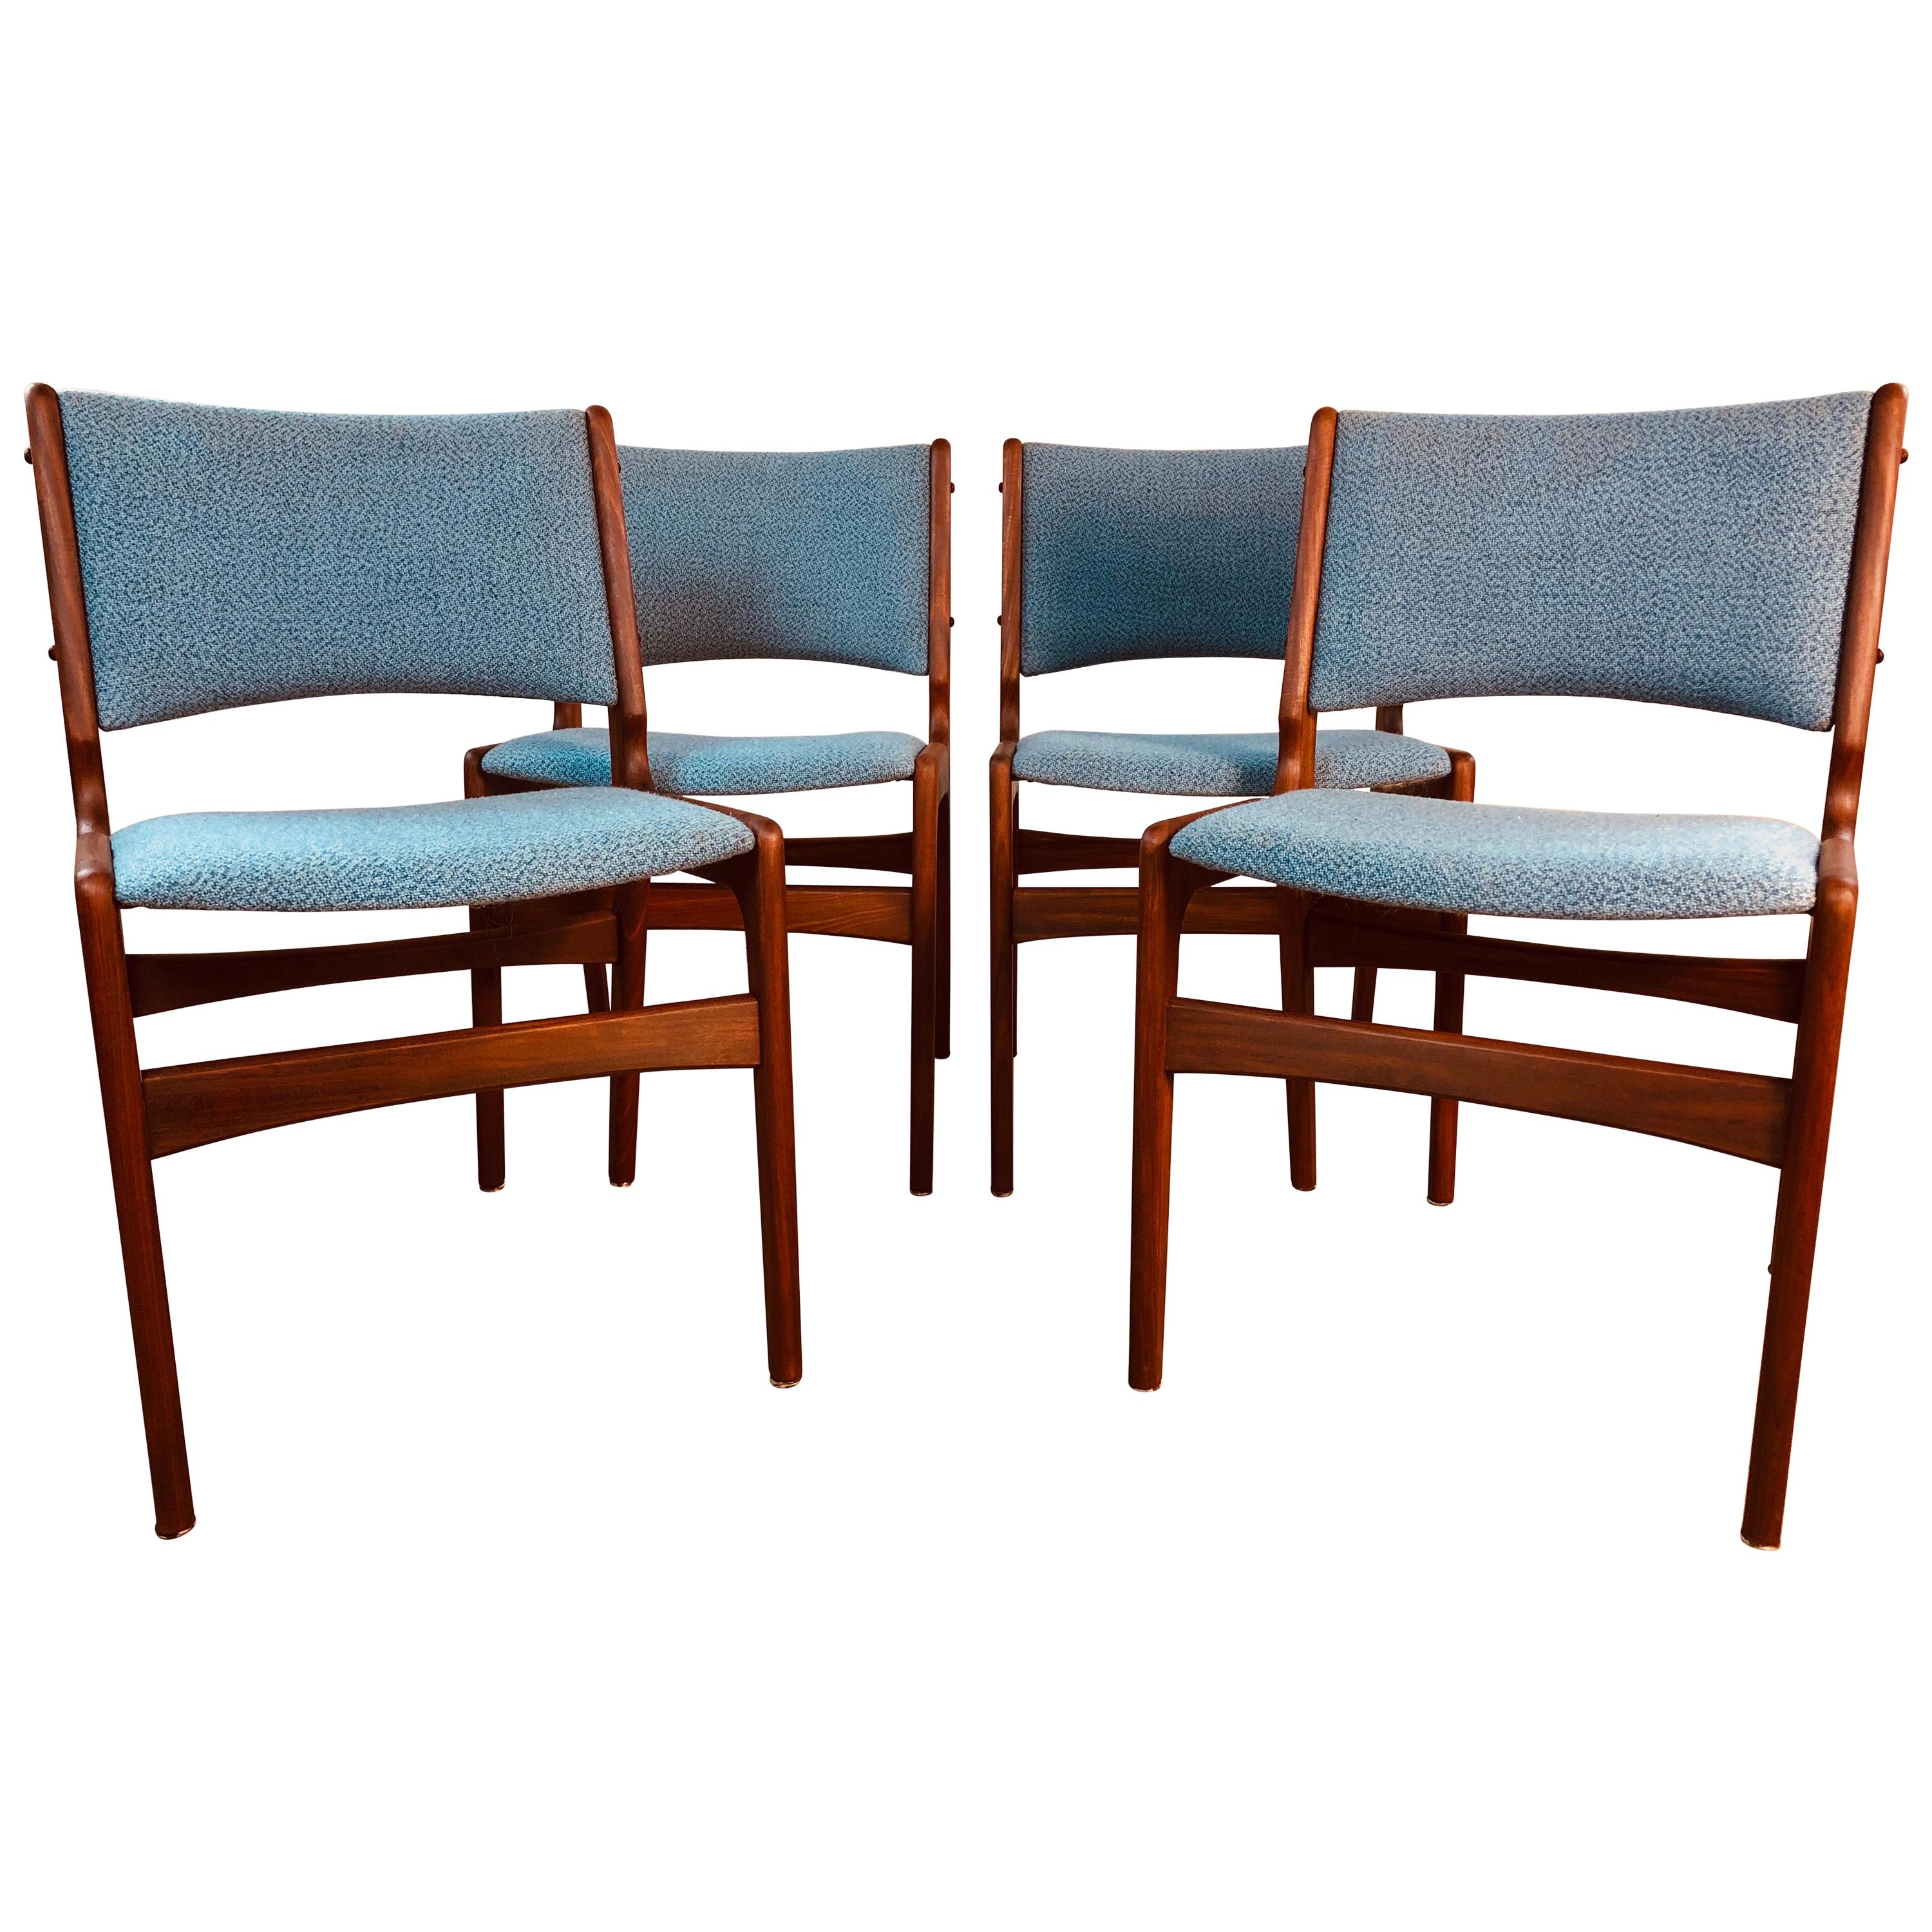 1960s Danish Teak Dining Room Chairs, Set of 4 For Sale